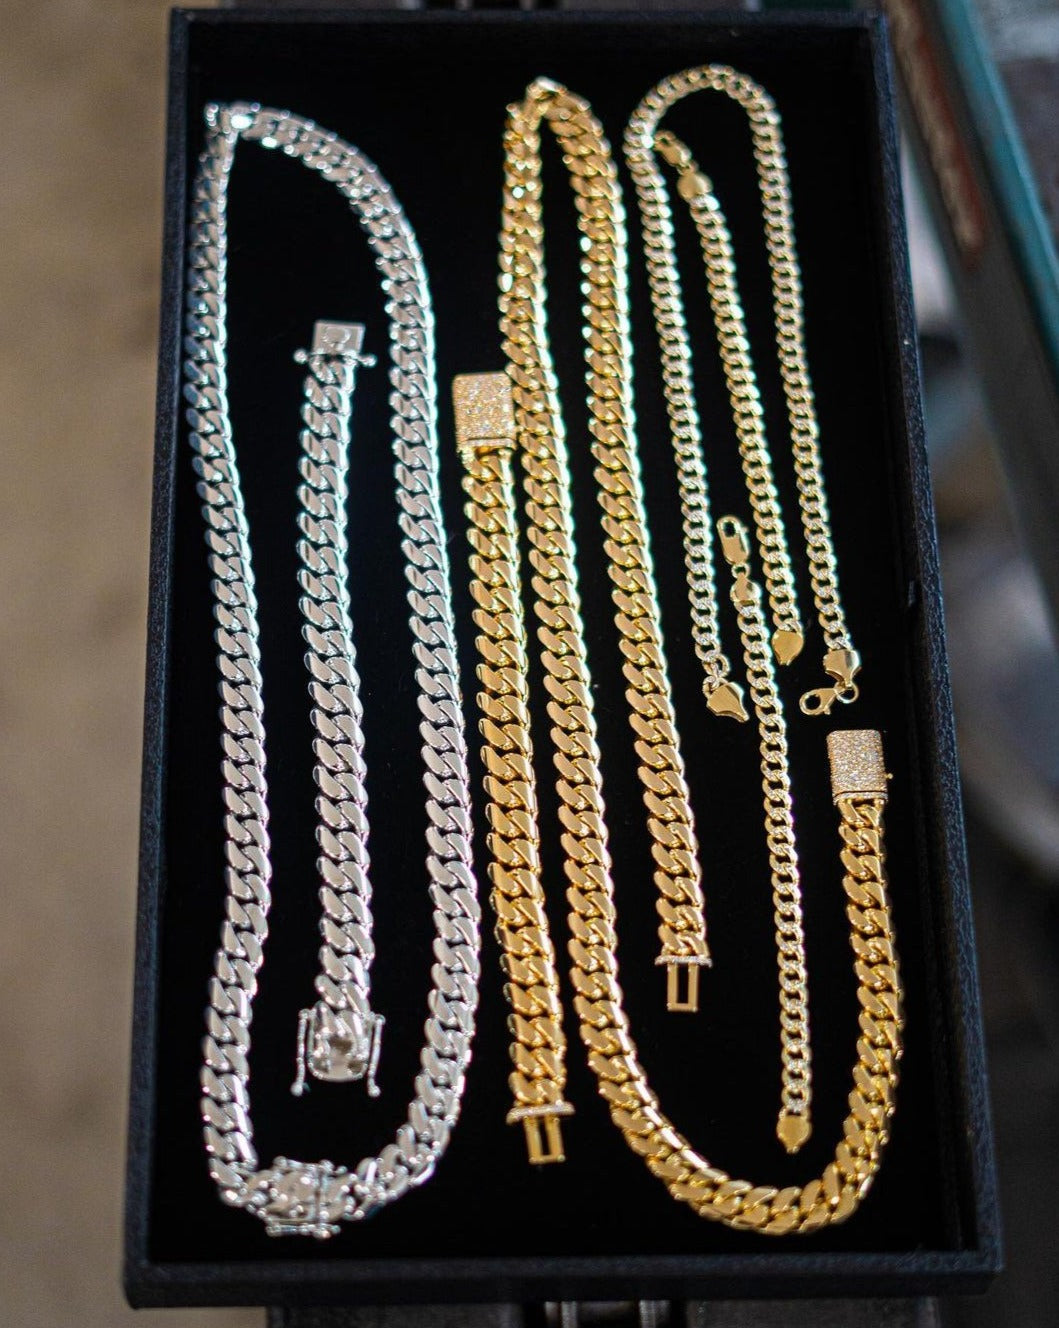 RARE PRINCE by CARAT SUTRA | Solid 12mm Miami Cuban Link Chain with Iced Lock | 22kt Gold Micron Plated on 925 Sterling Silver Chain with AAA+ Quality Swarovski Diamonds | Men's Jewelry | With Certificate of Authenticity and 925 Hallmark - caratsutra